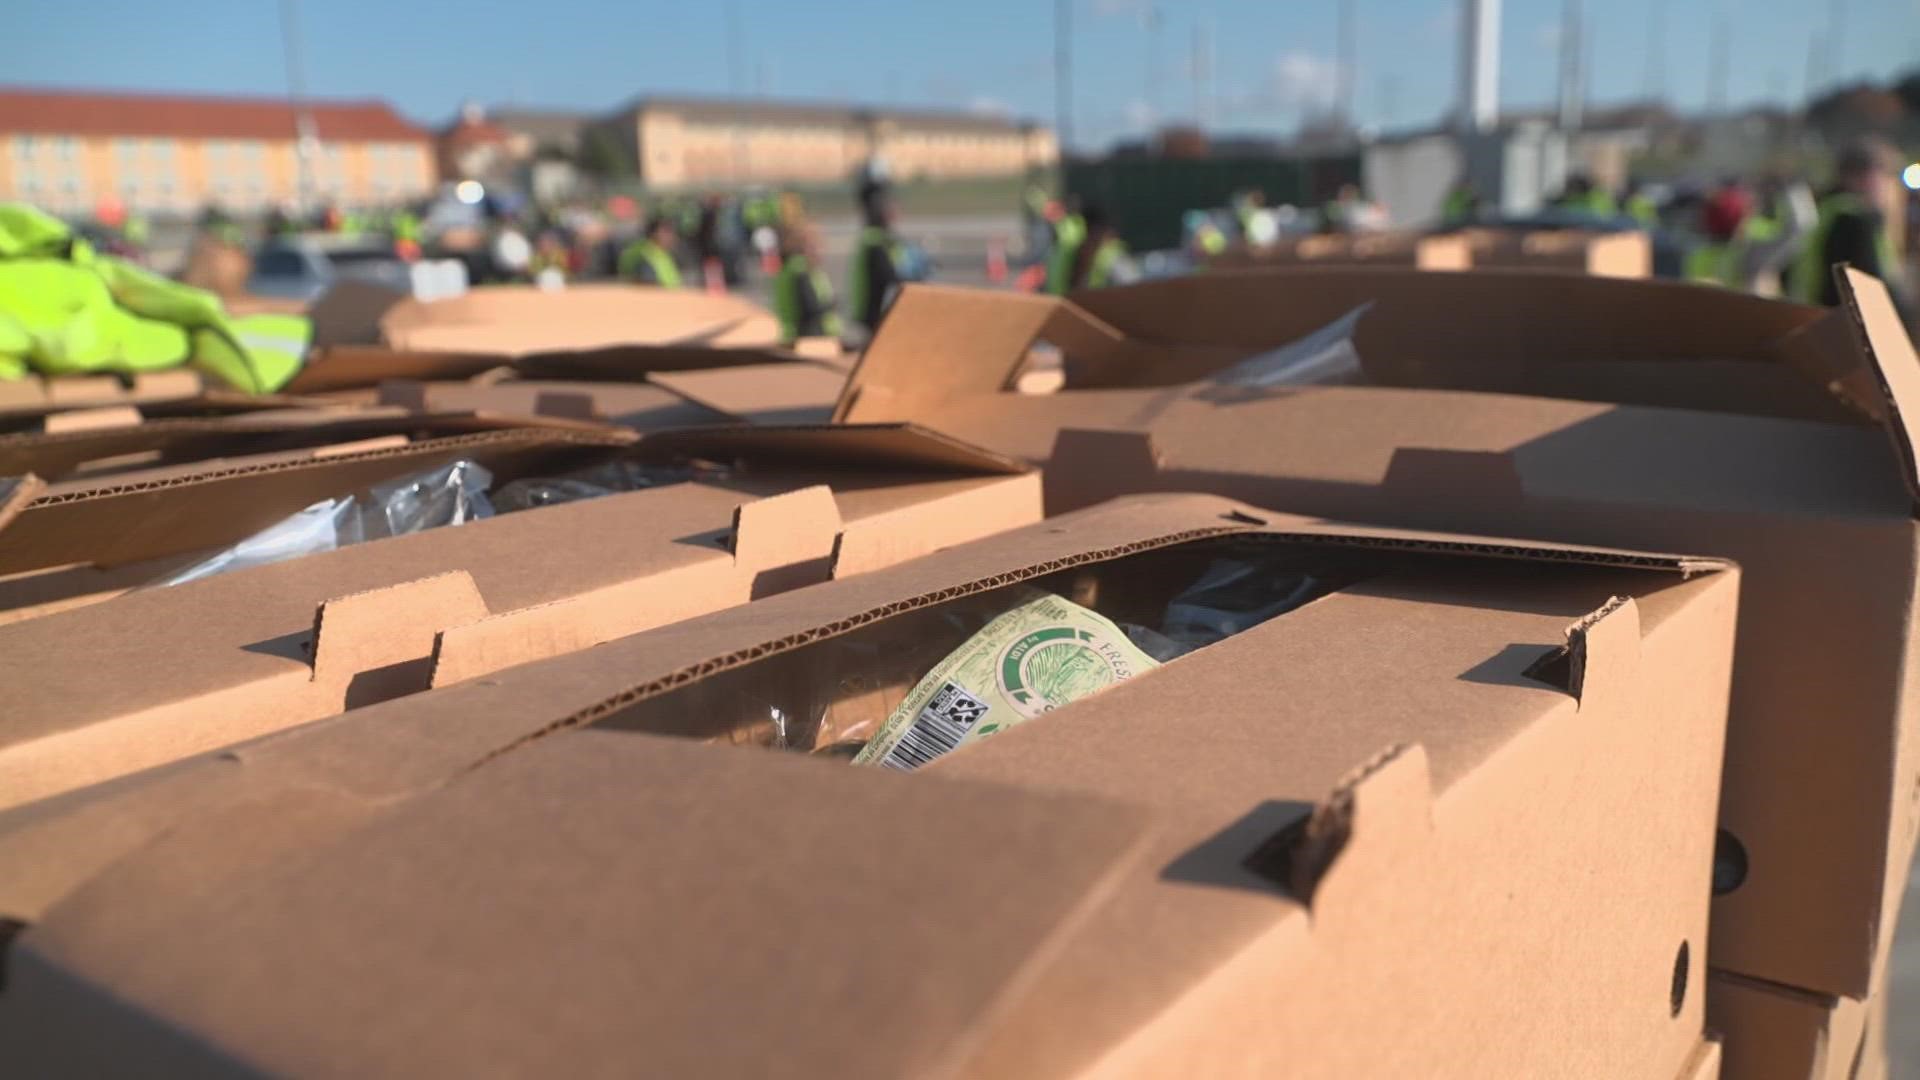 The Tarrant Area Food Bank hosted its first mega mobile distribution in Denton County, and hundreds of families took advantage of it.